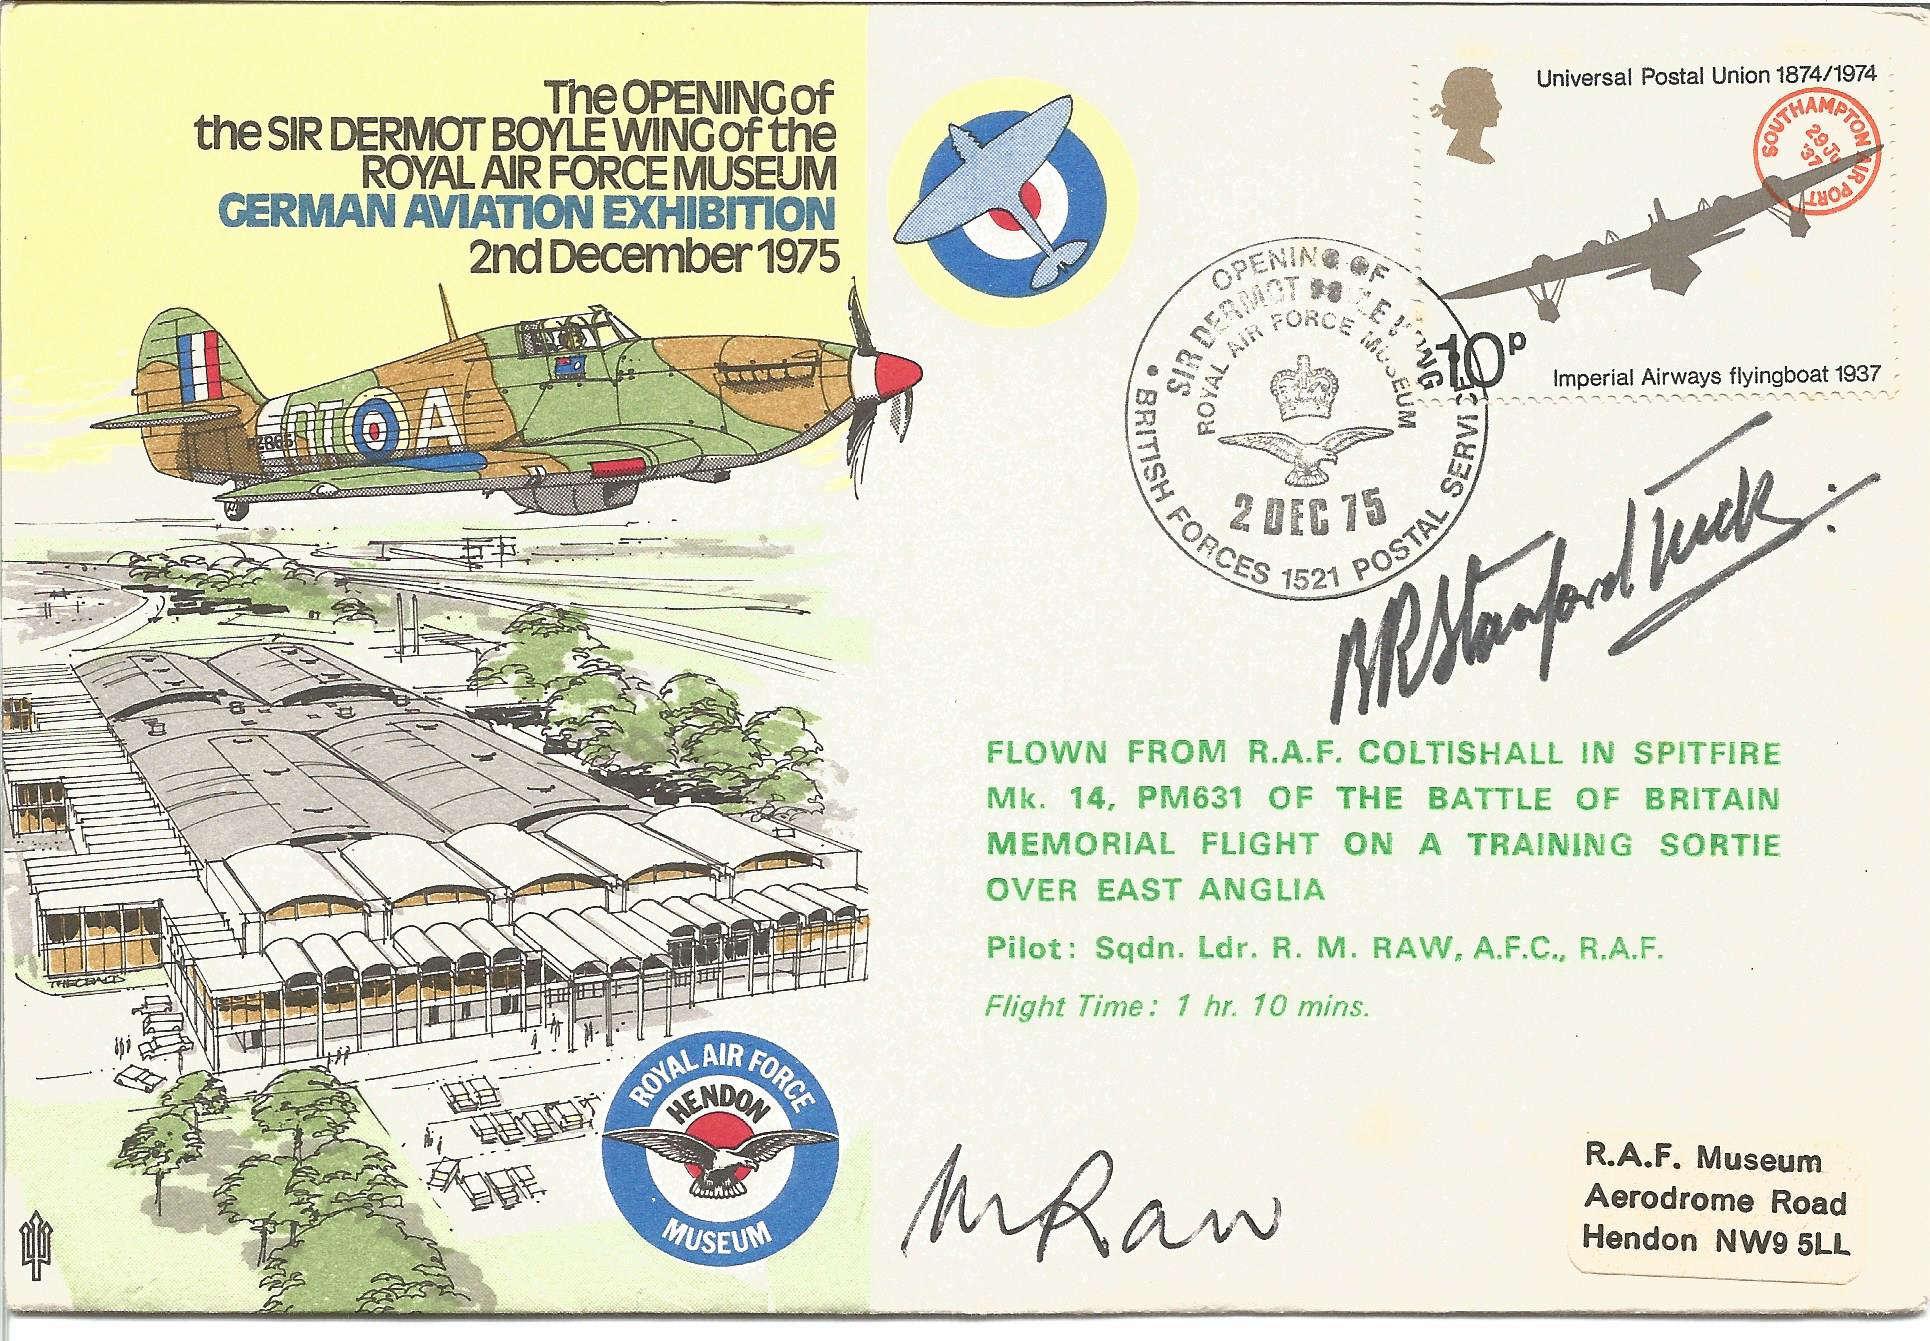 Robert Stanford Tuck DSO DFC WW2 fighter ace signed German Aviation Exhibition cover. RAF WW2.